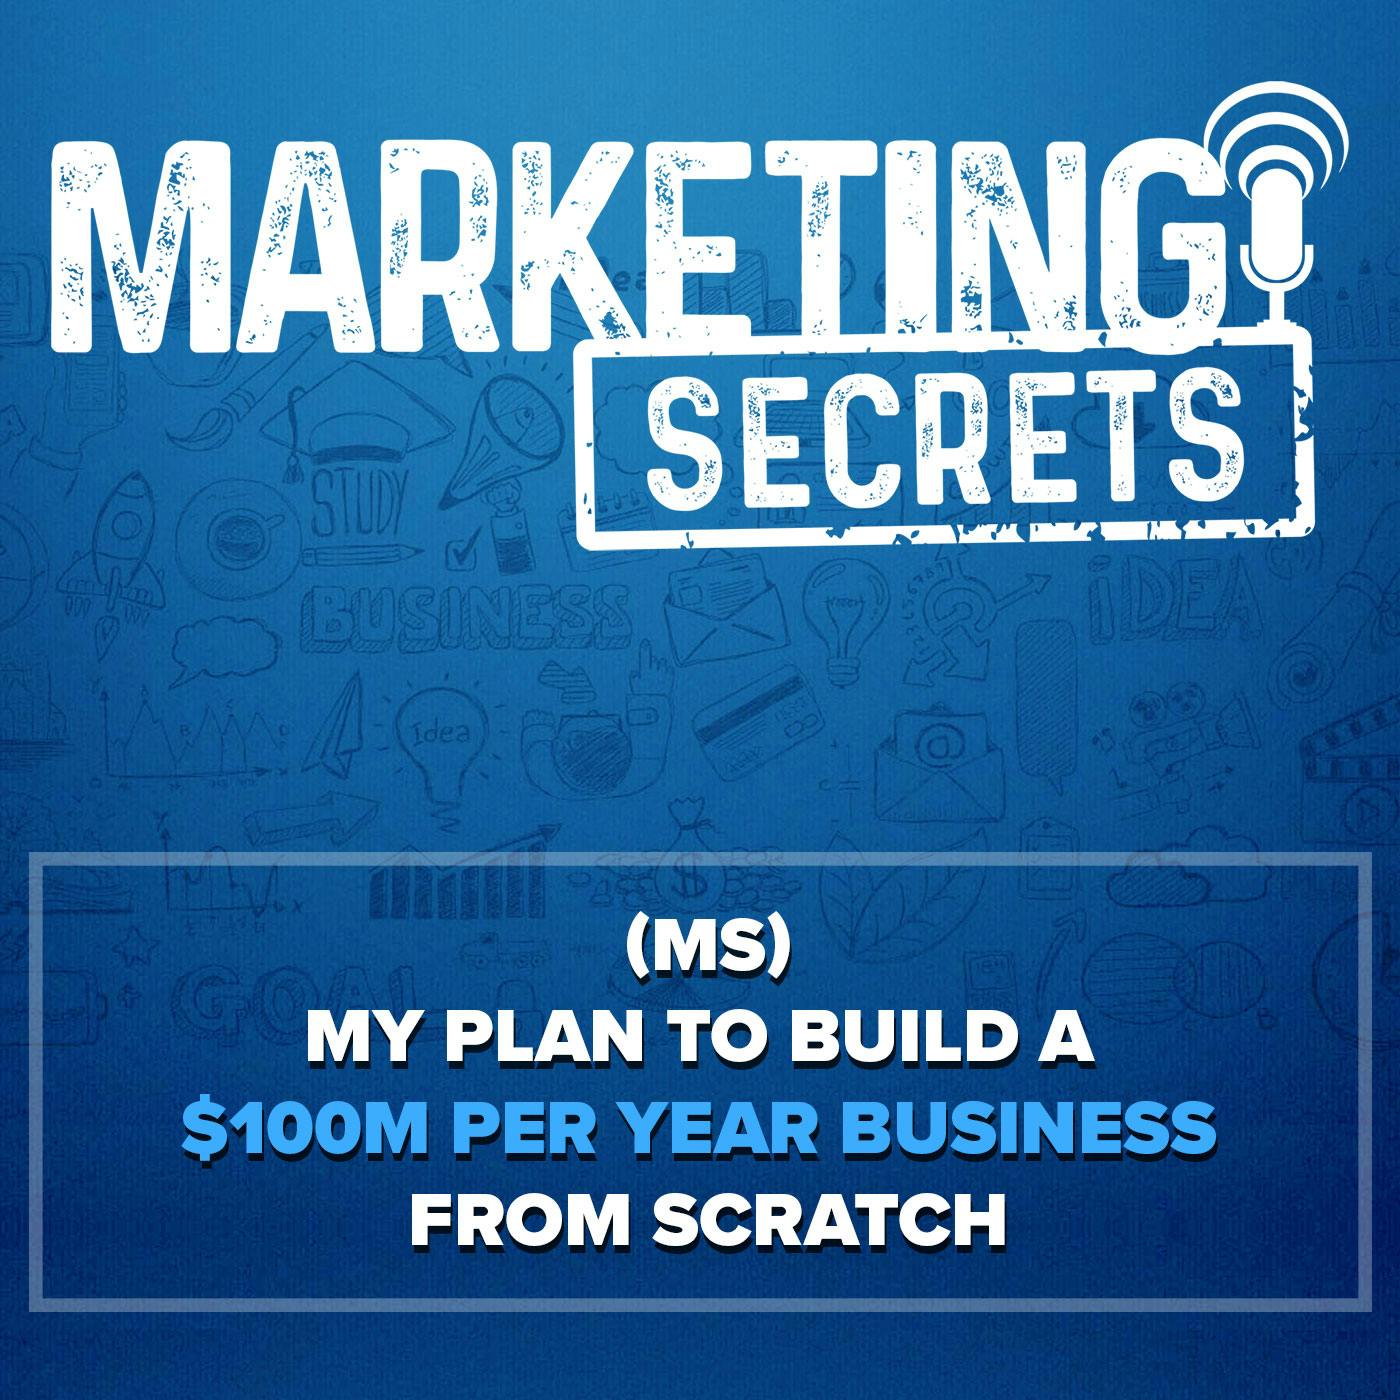 My Plan To Build A $100M Per Year Business From Scratch